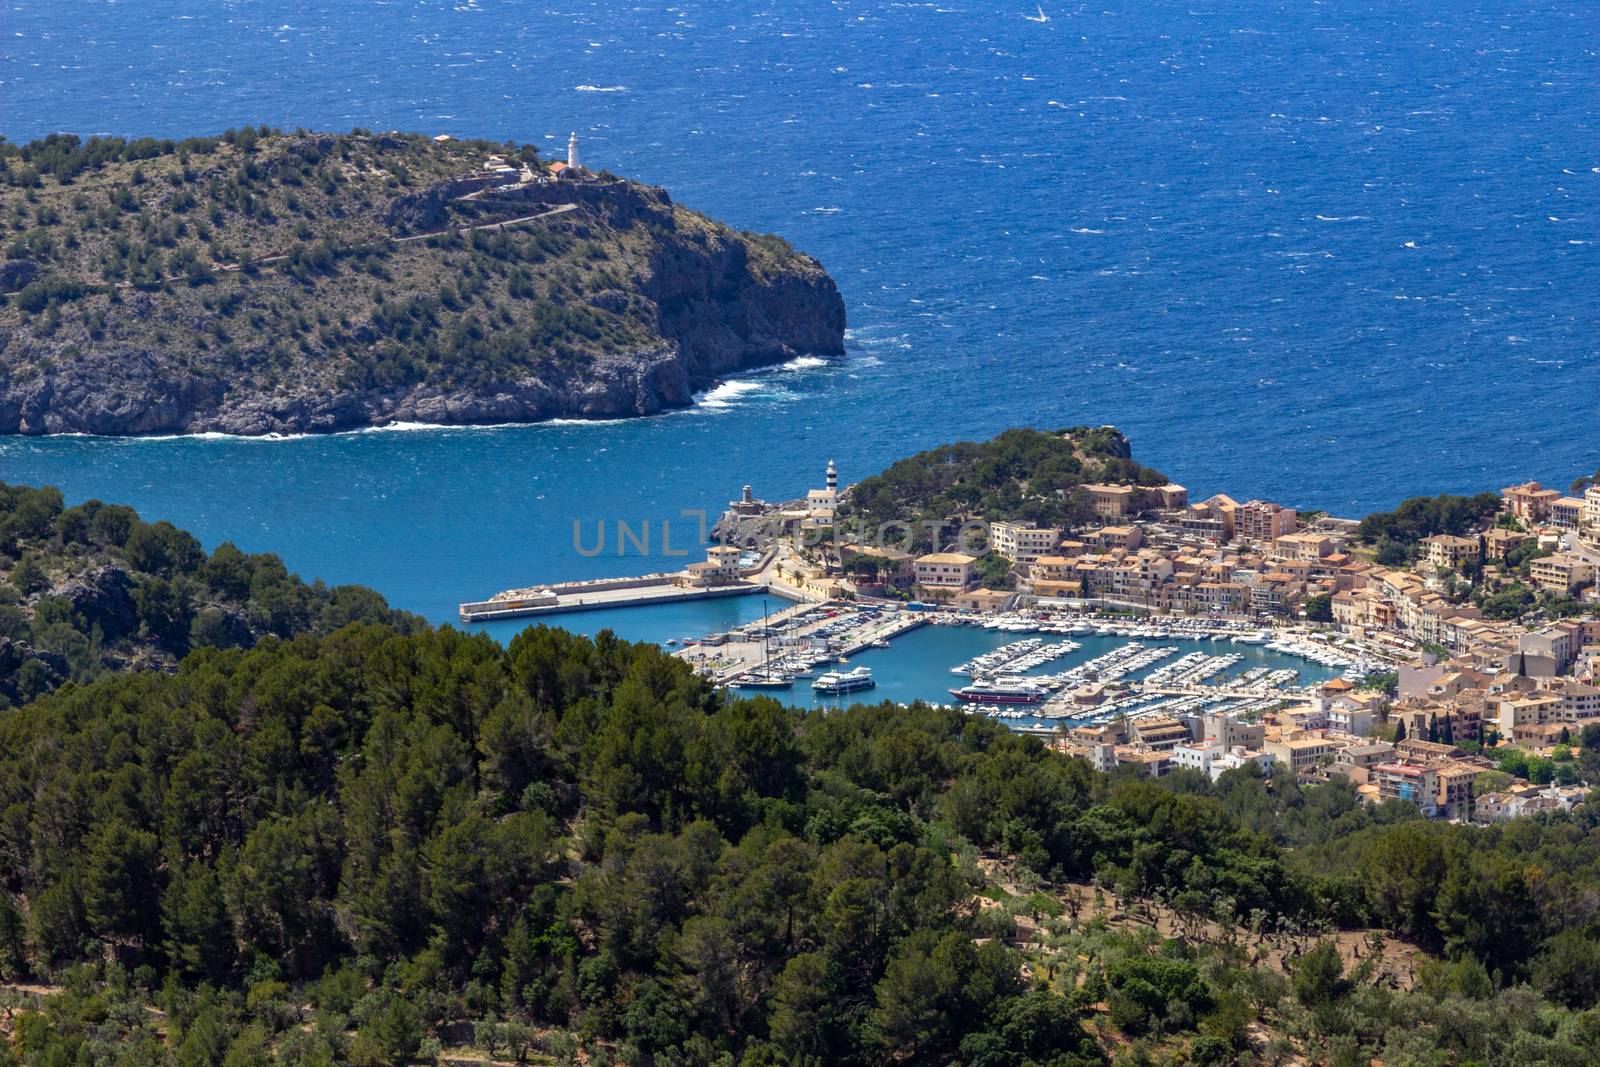 Scenic View at Port de Soller on Mallorca, Spain by reinerc